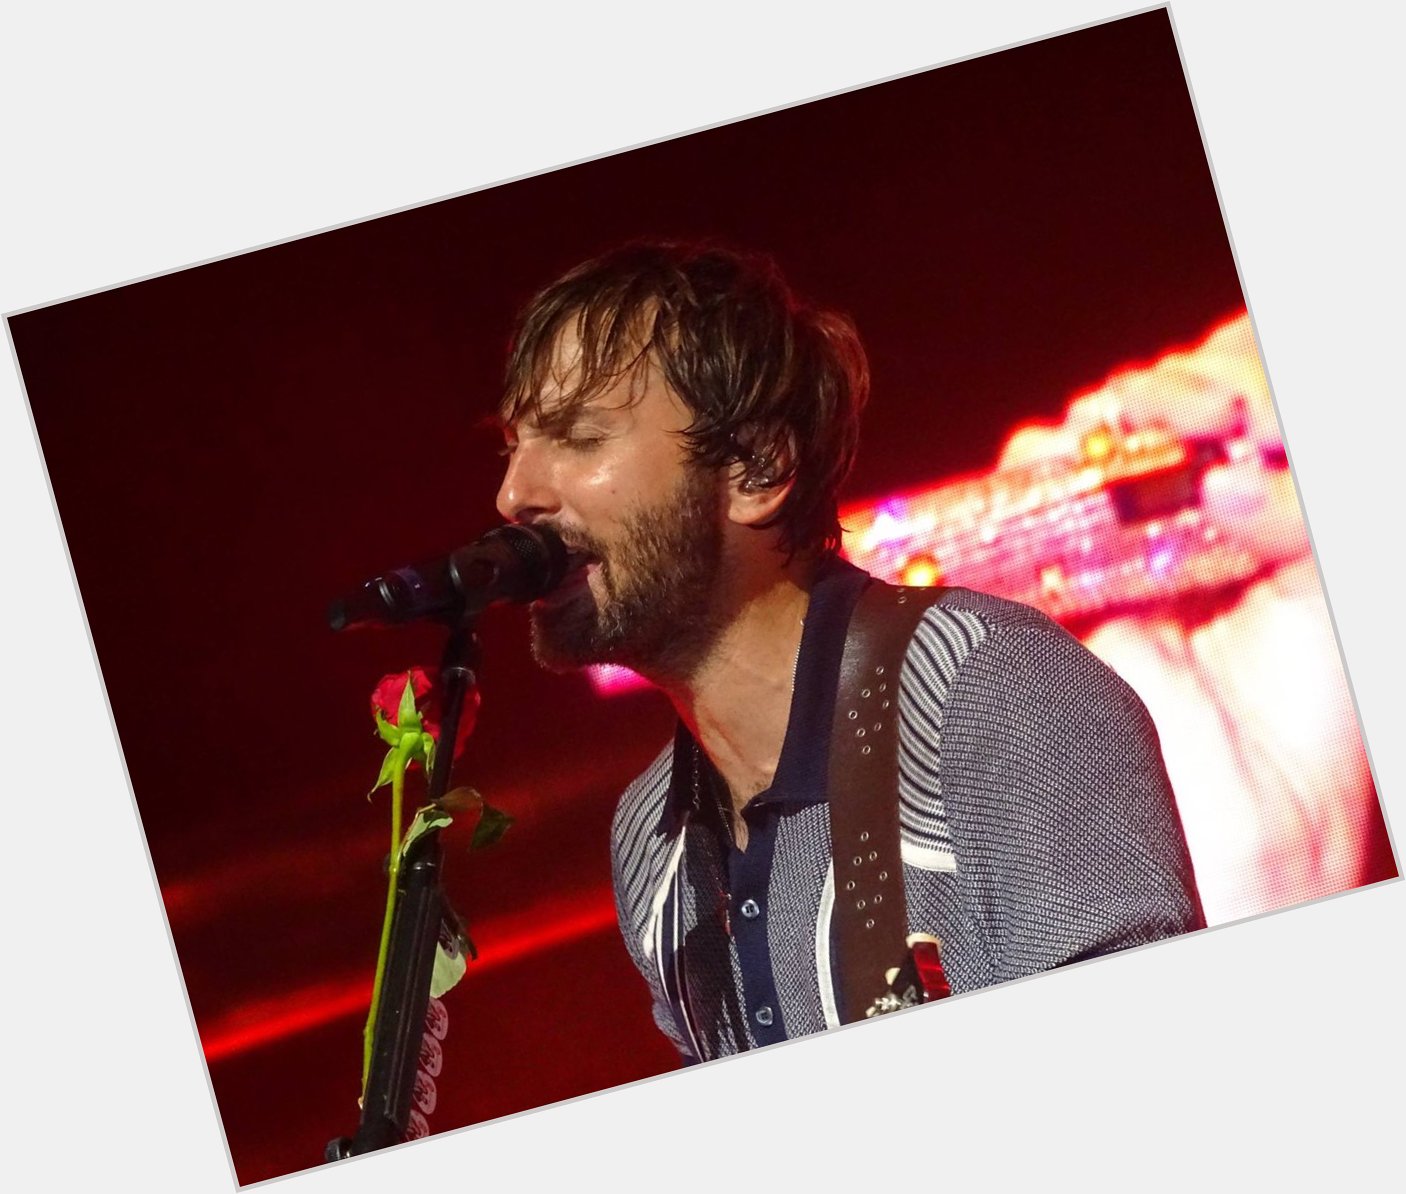 Happy Birthday to Dave Haywood from One of my favorite artists. Thanks for making awesome music! 